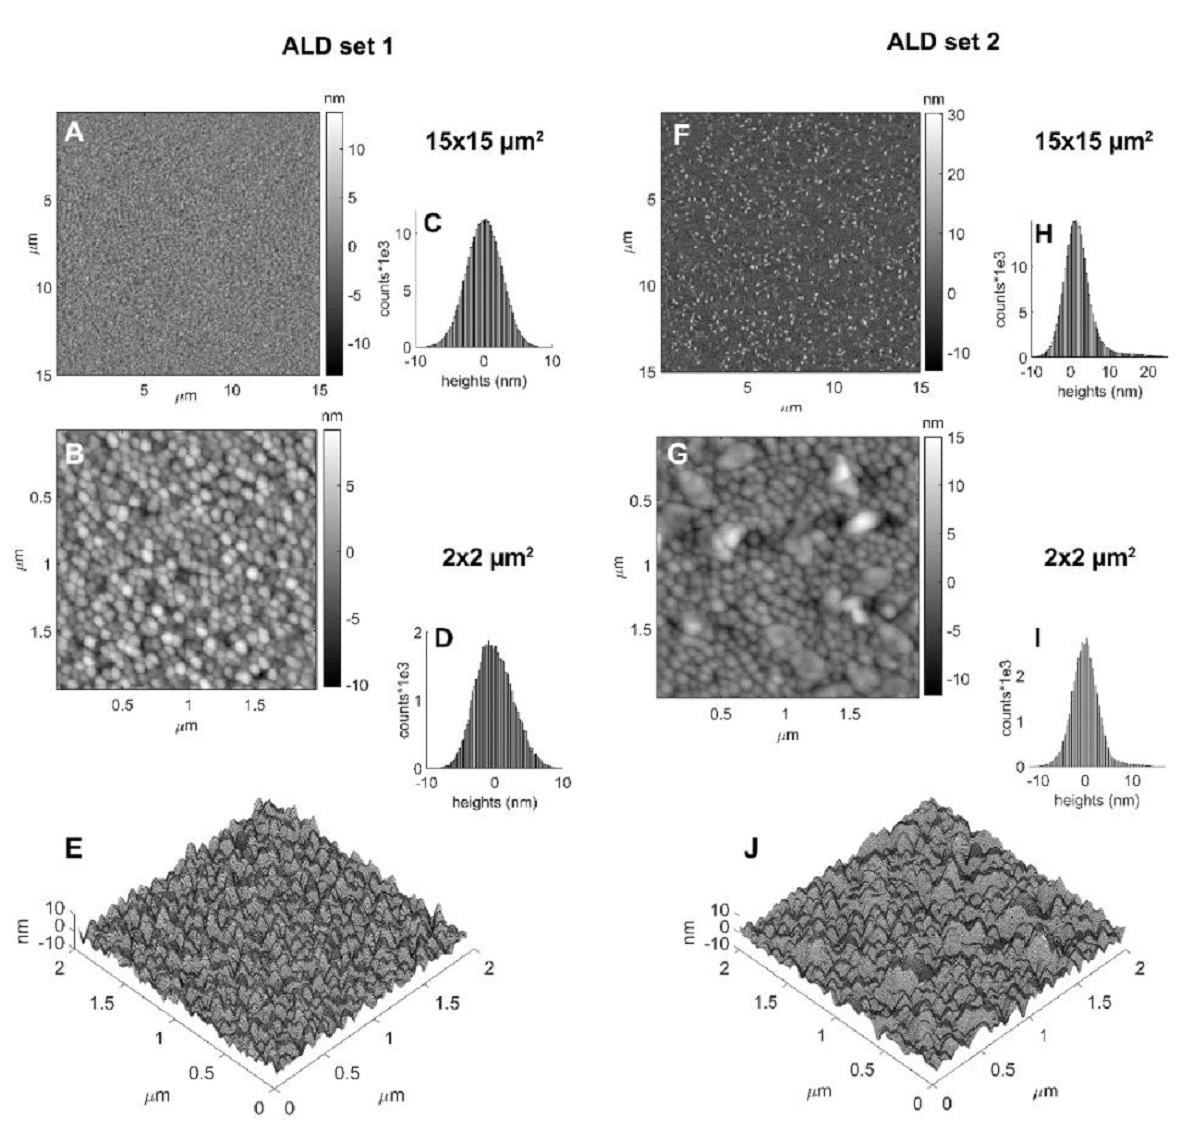  Supplementary Information S8. showing the Atomic Force Microscopy (AFM)ALD films roughness characterization from «Nucleation in confinement generates long-range repulsion between rough calcite surfaces” by Joanna Dziadkowiec et al.:
 Figure S7 show the AFM height maps (A, B, E, F, G, J) and histograms of surface heights (C, D, H, I) of the initial set 1 (A-E) and set 2 (F-J) ALD calcite surfaces for two scan sizes of 15x15 μm2(A, C, F, H)and 2x2 μm2(B, D, E, G, I, J). The images E and J show 3D height maps of the B, G height maps, respectively 